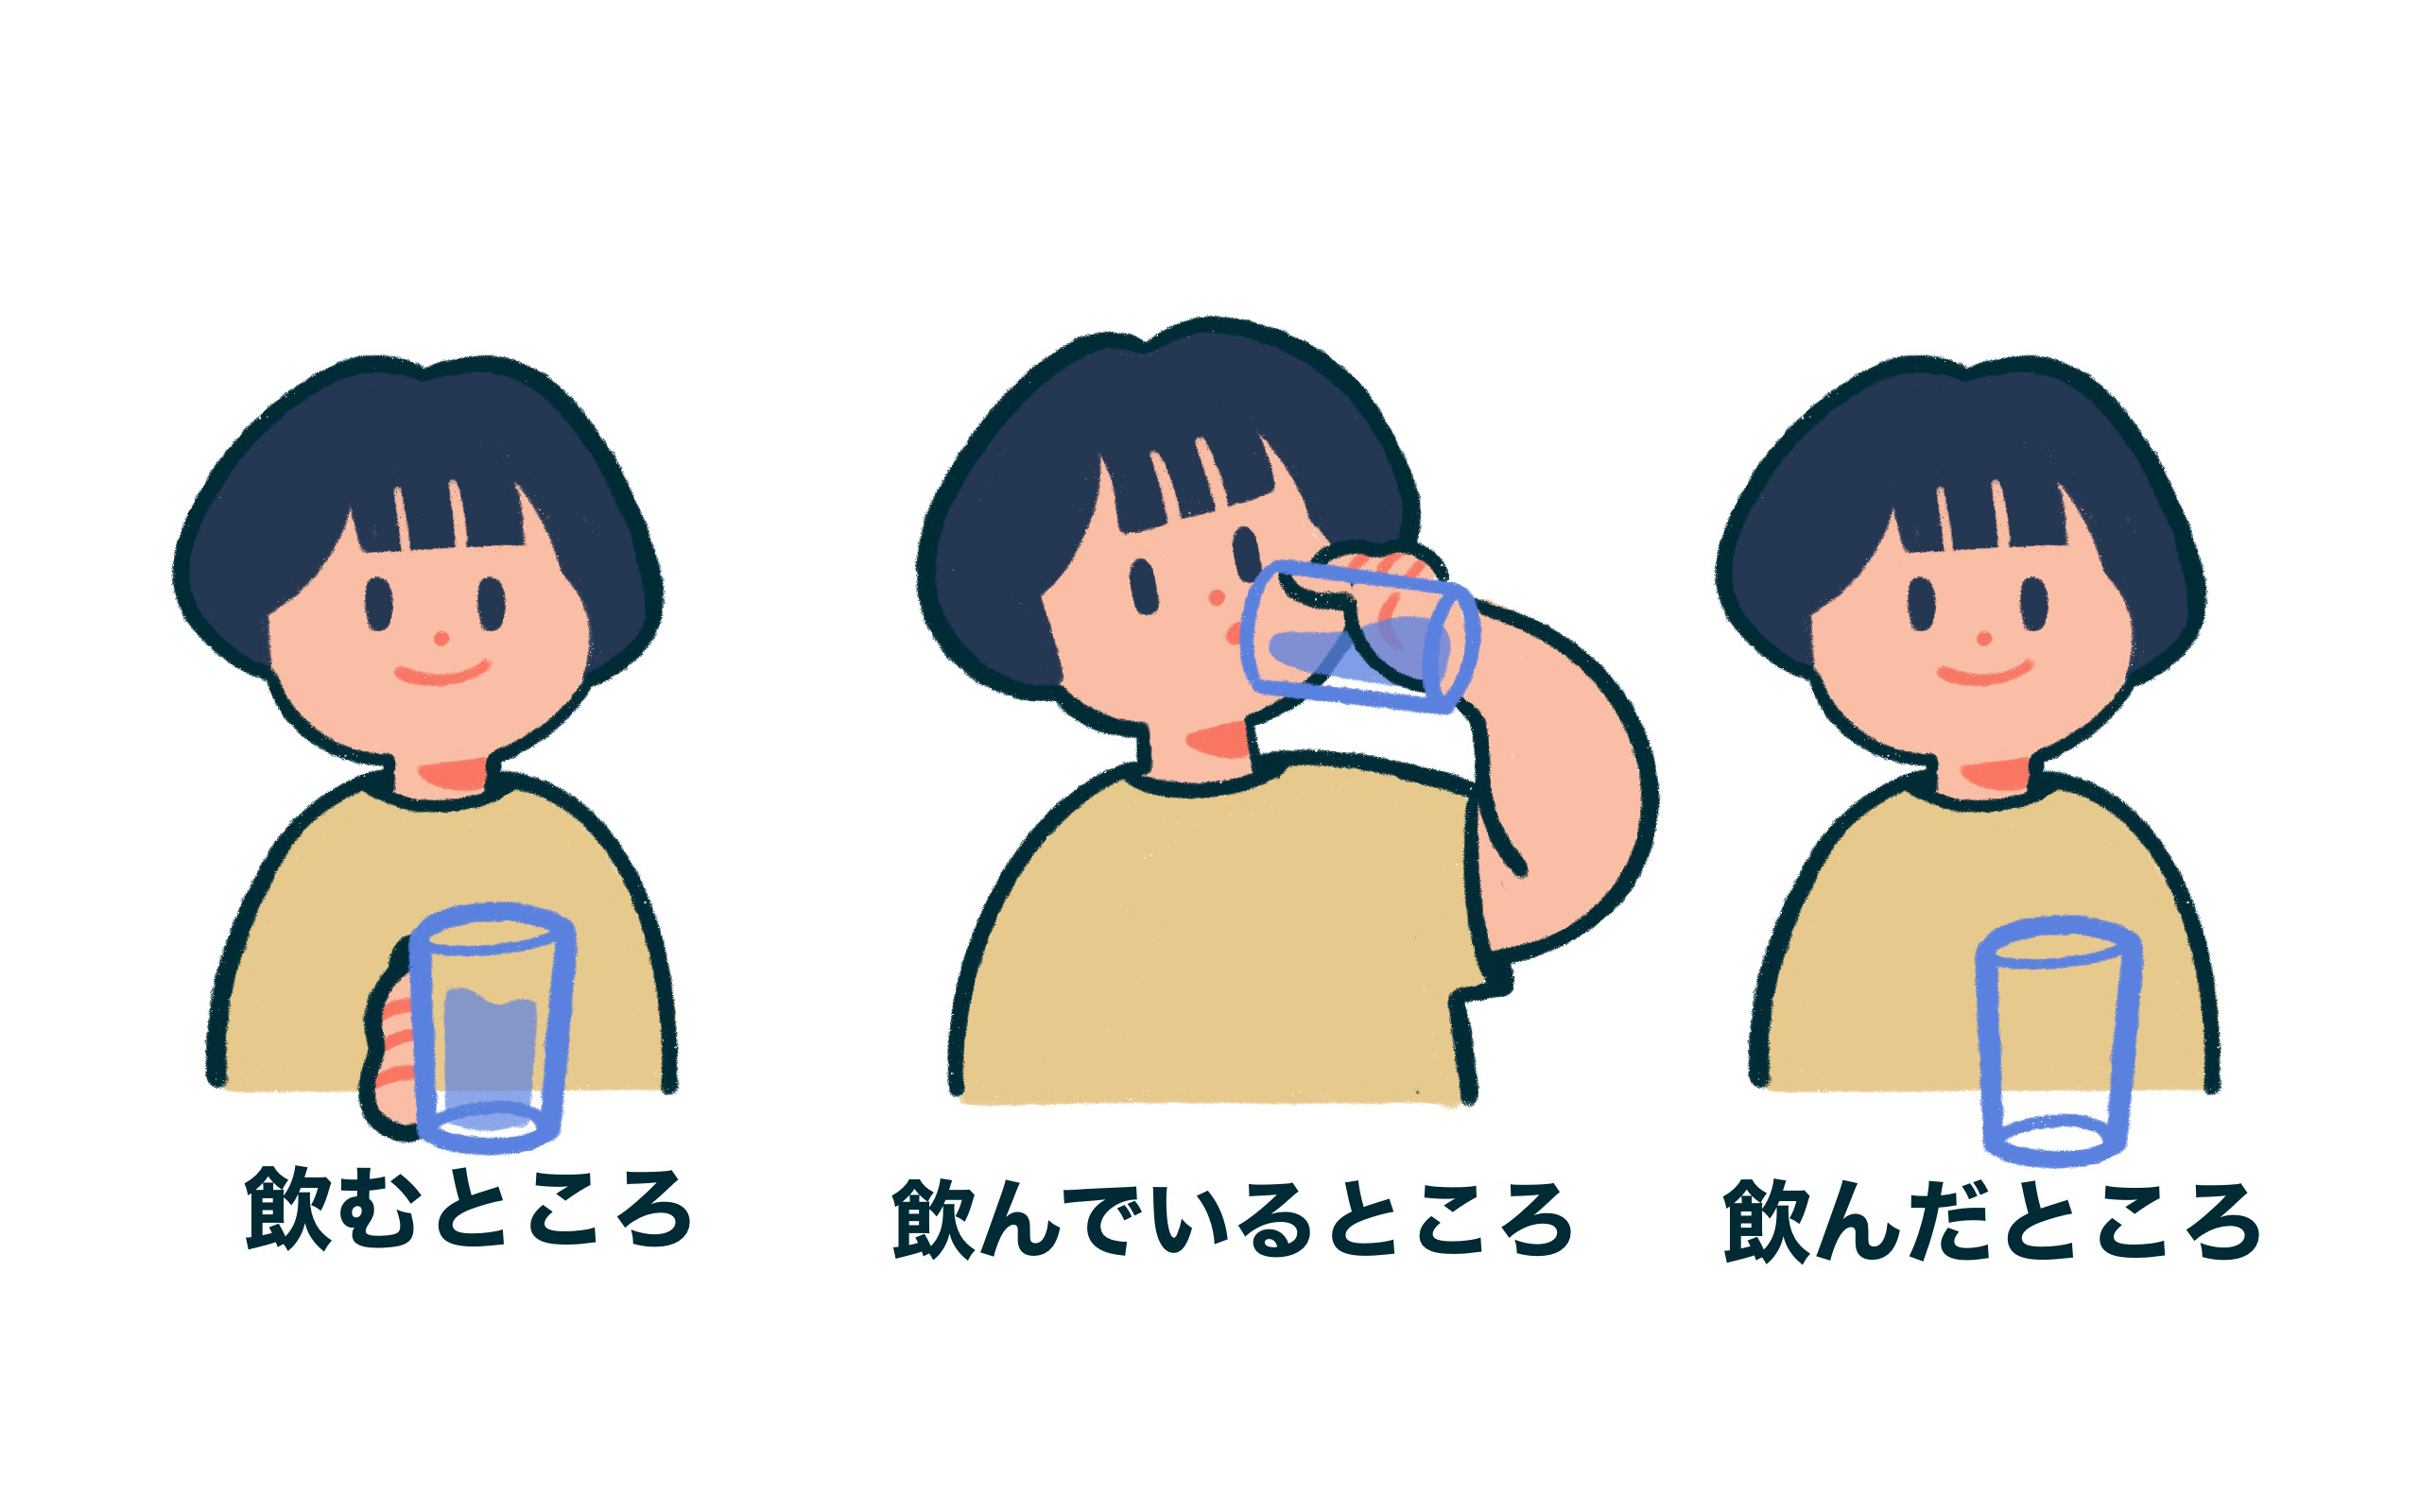 someone just before, during, and after drinking a glass of water